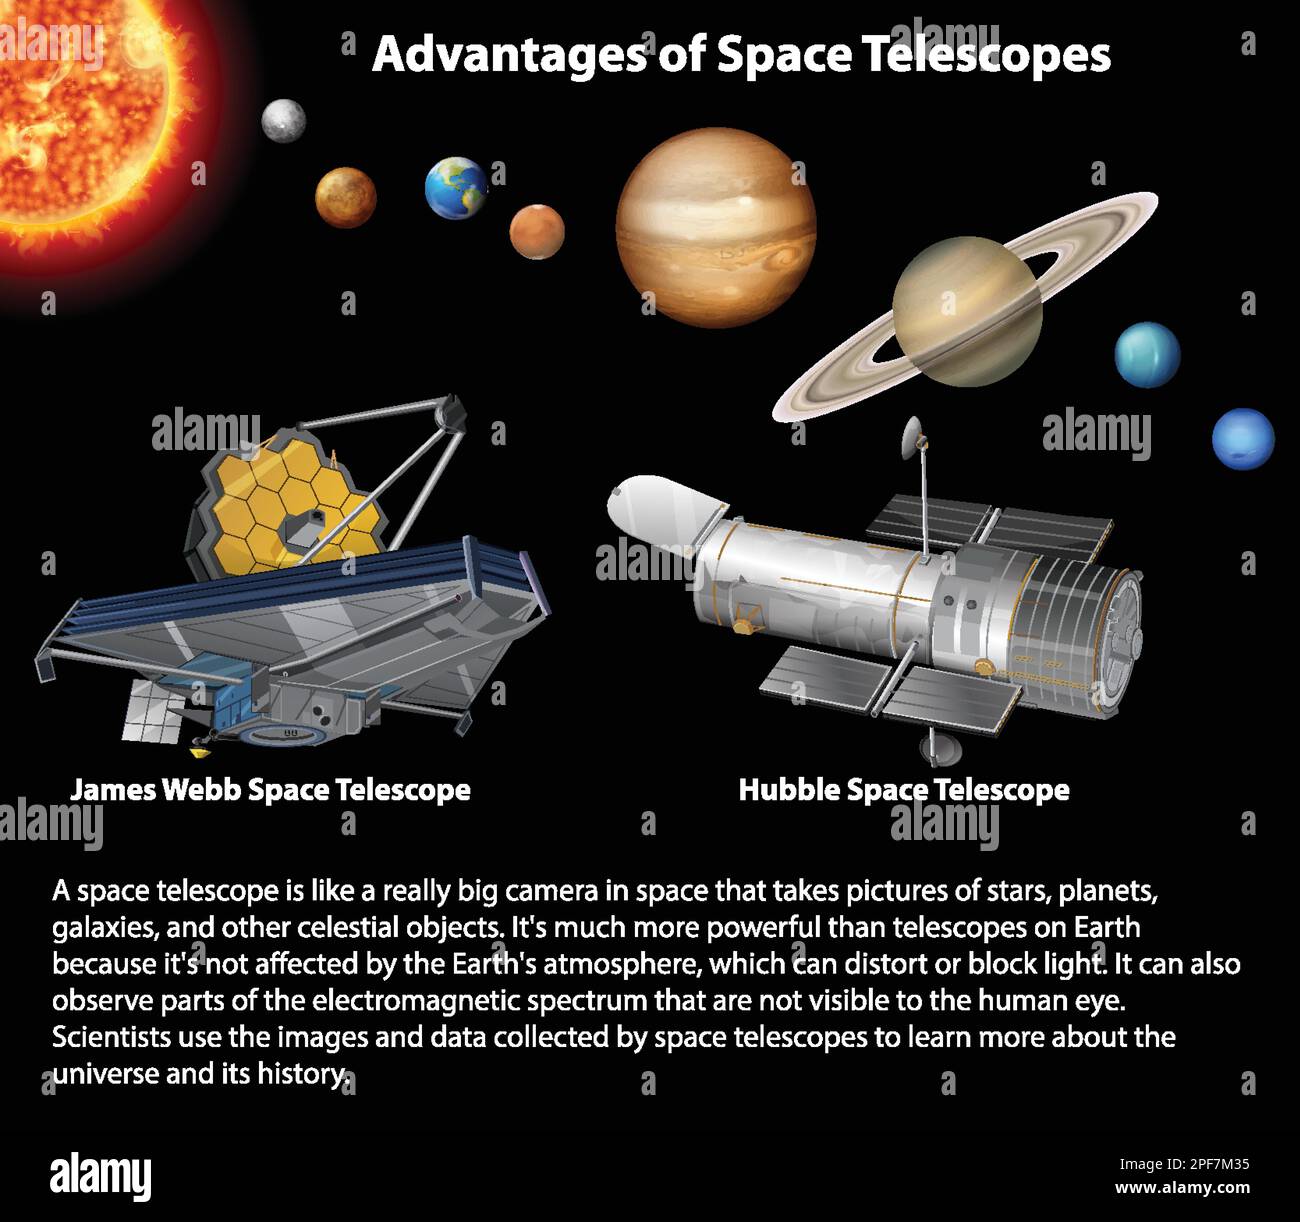 Advantages of Space Telescopes illustration Stock Vector